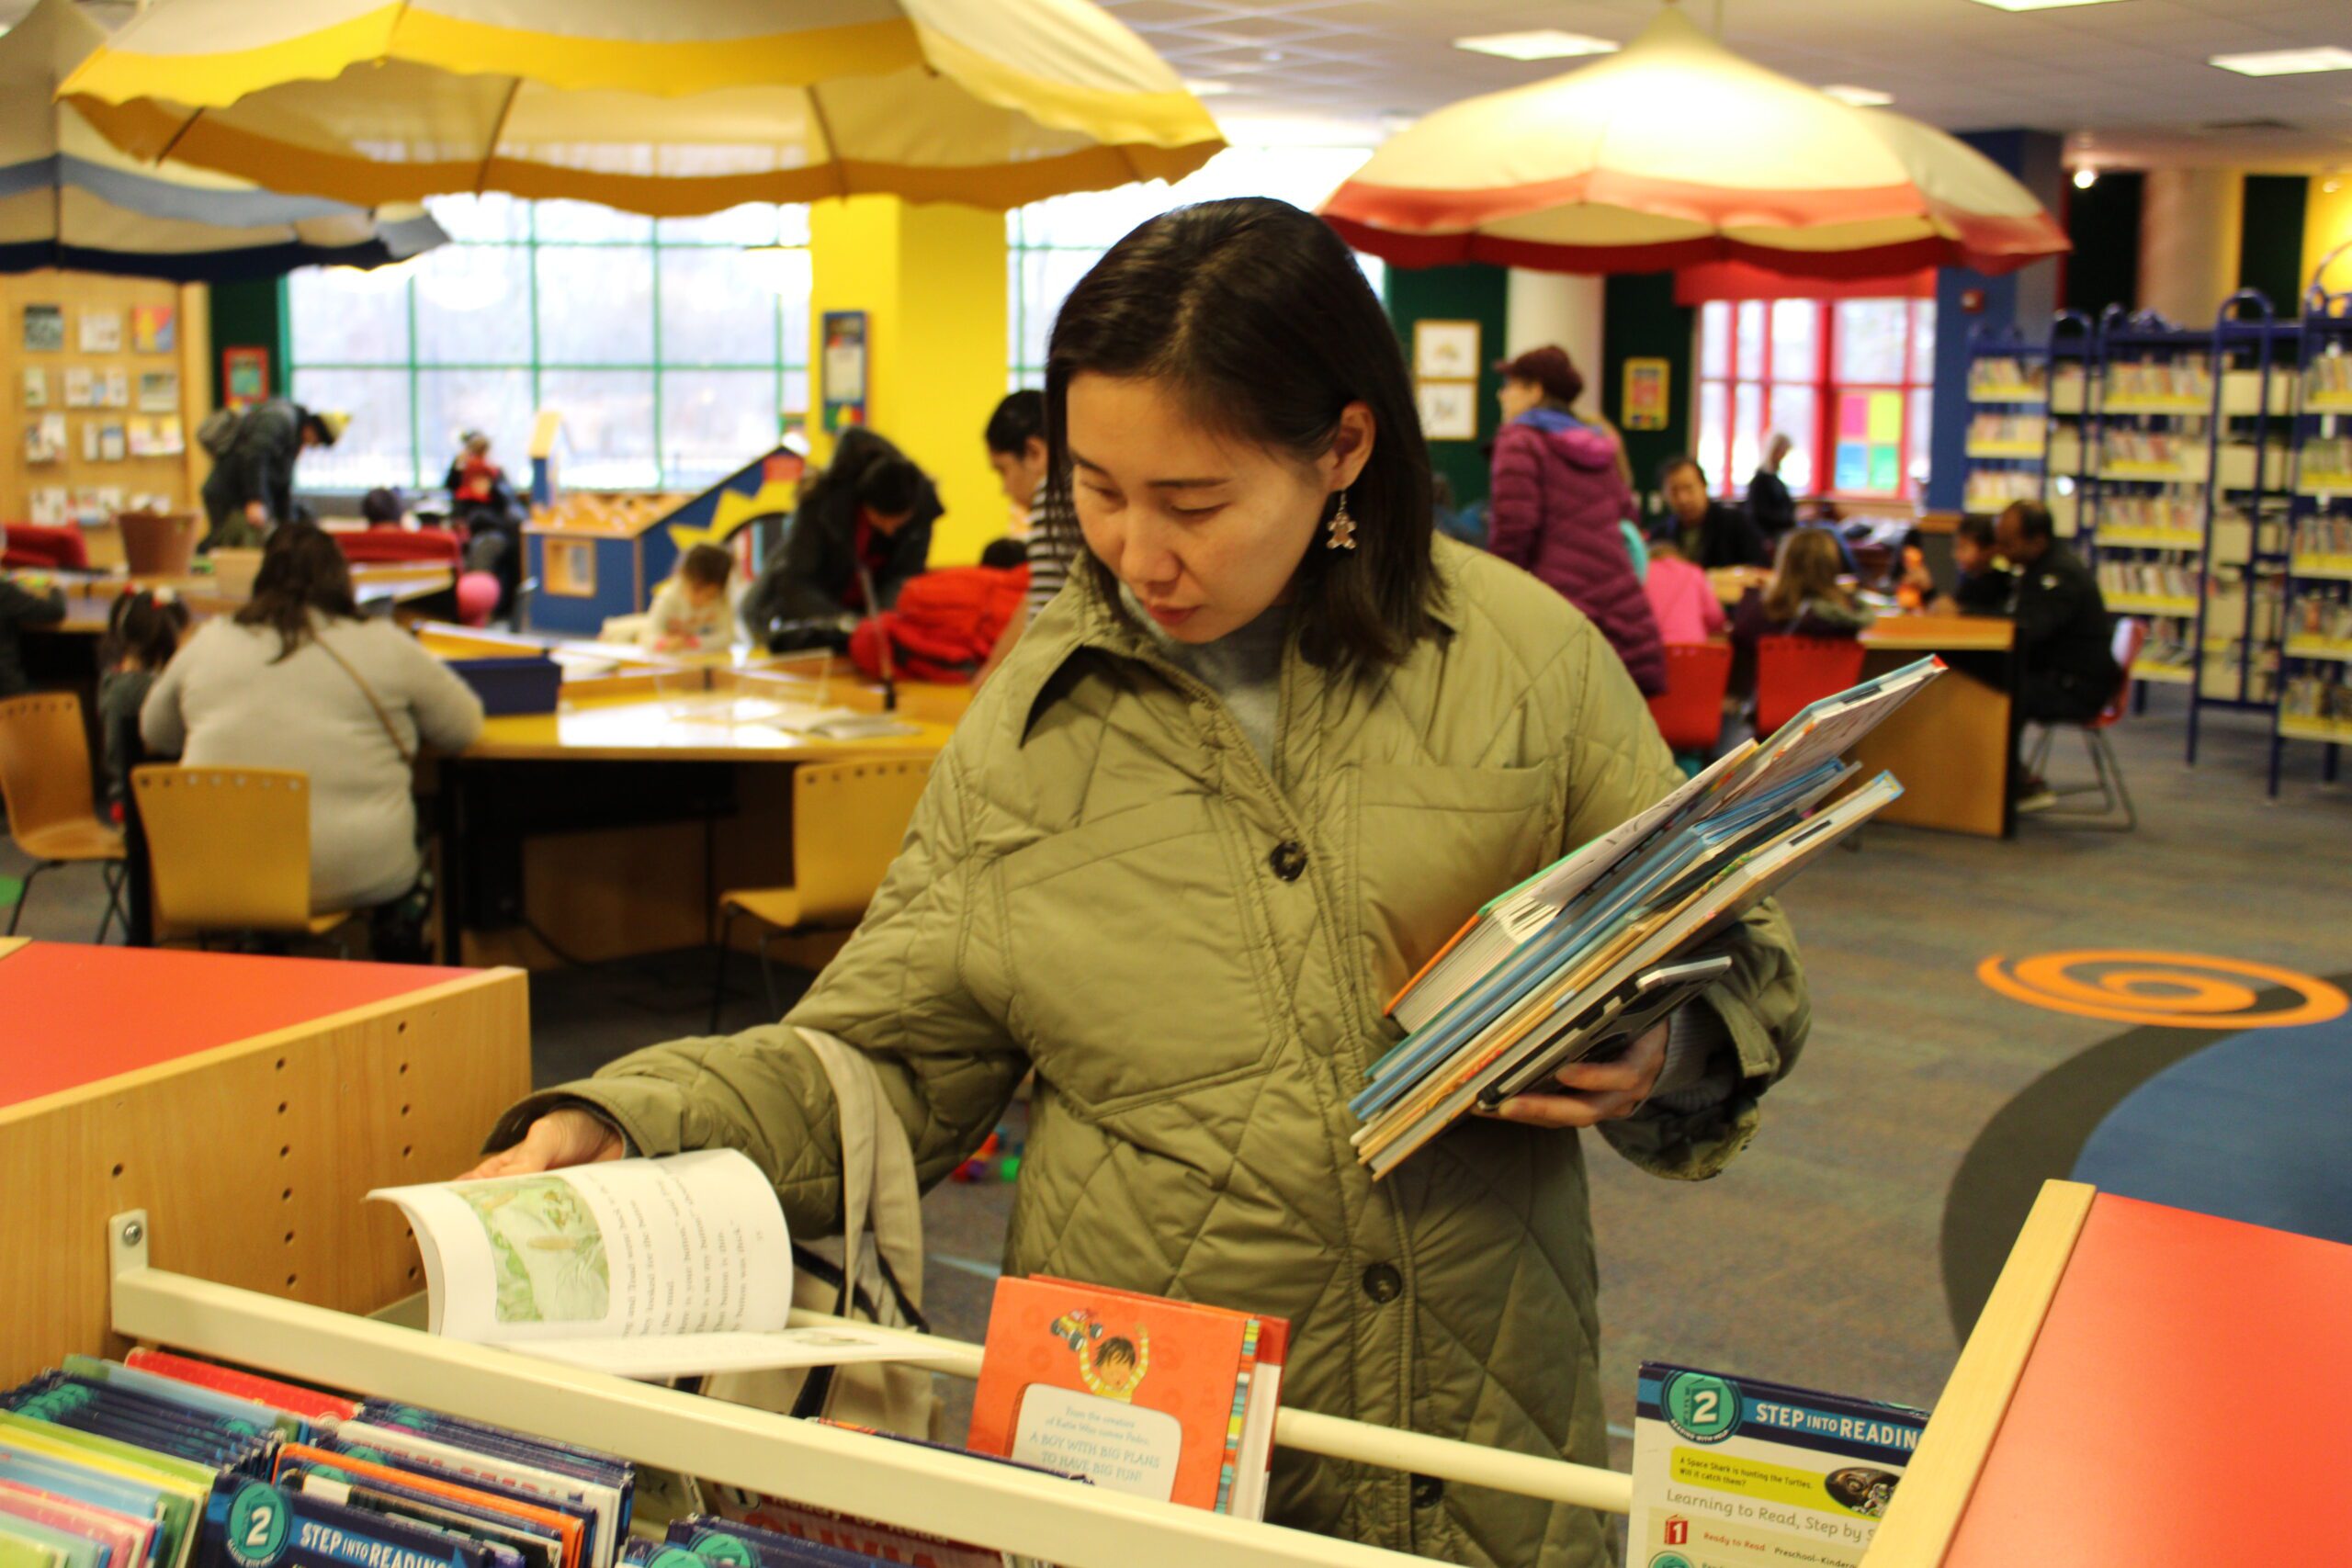 Patron looking through books in the Main Library youth area